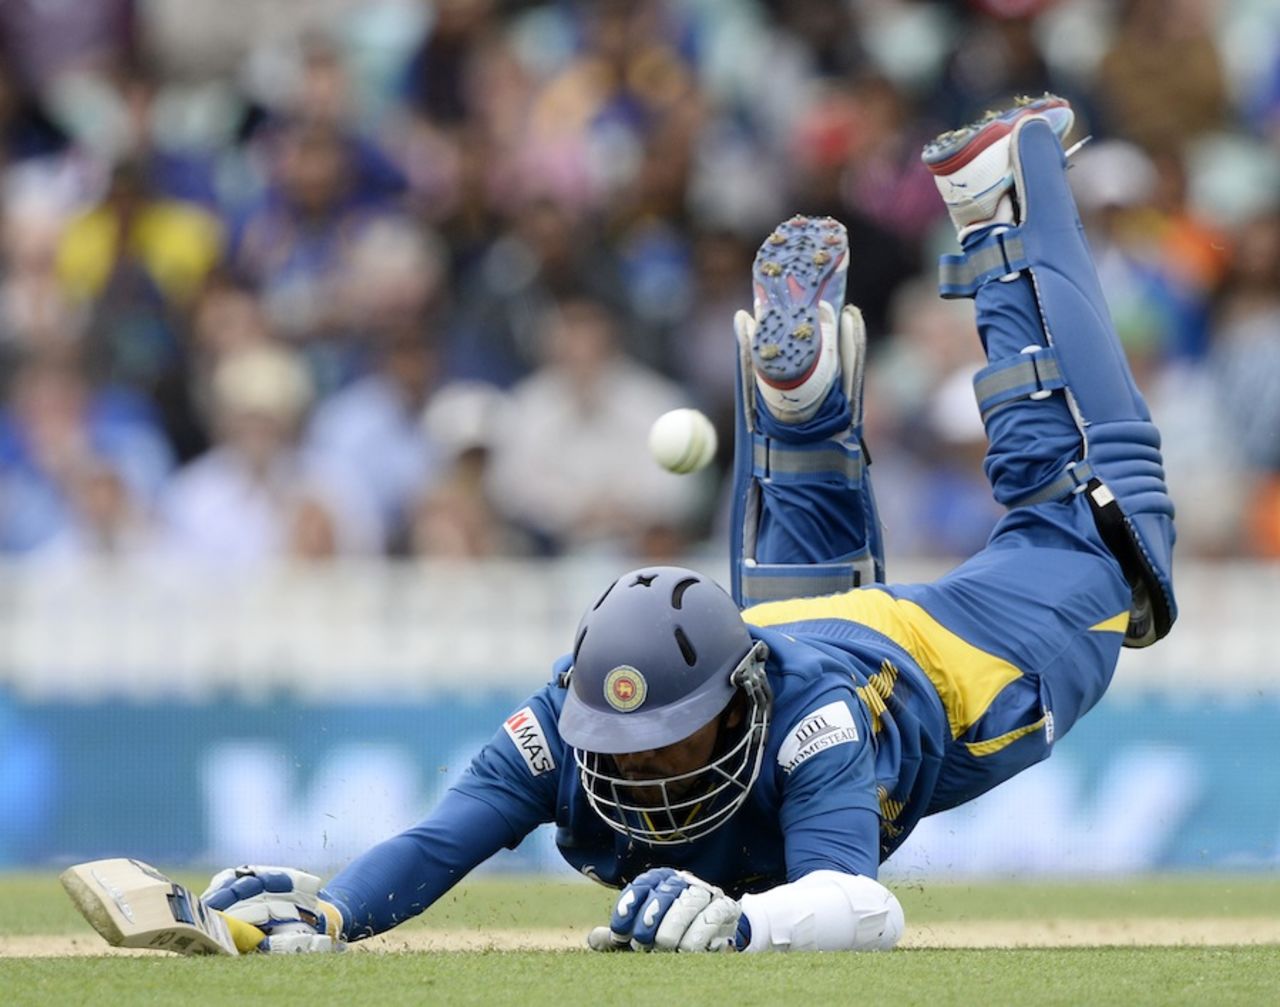 Tillakaratne Dilshan dives to makes his ground, Australia v Sri Lanka, Champions Trophy, Group A, The Oval, June 17, 2013